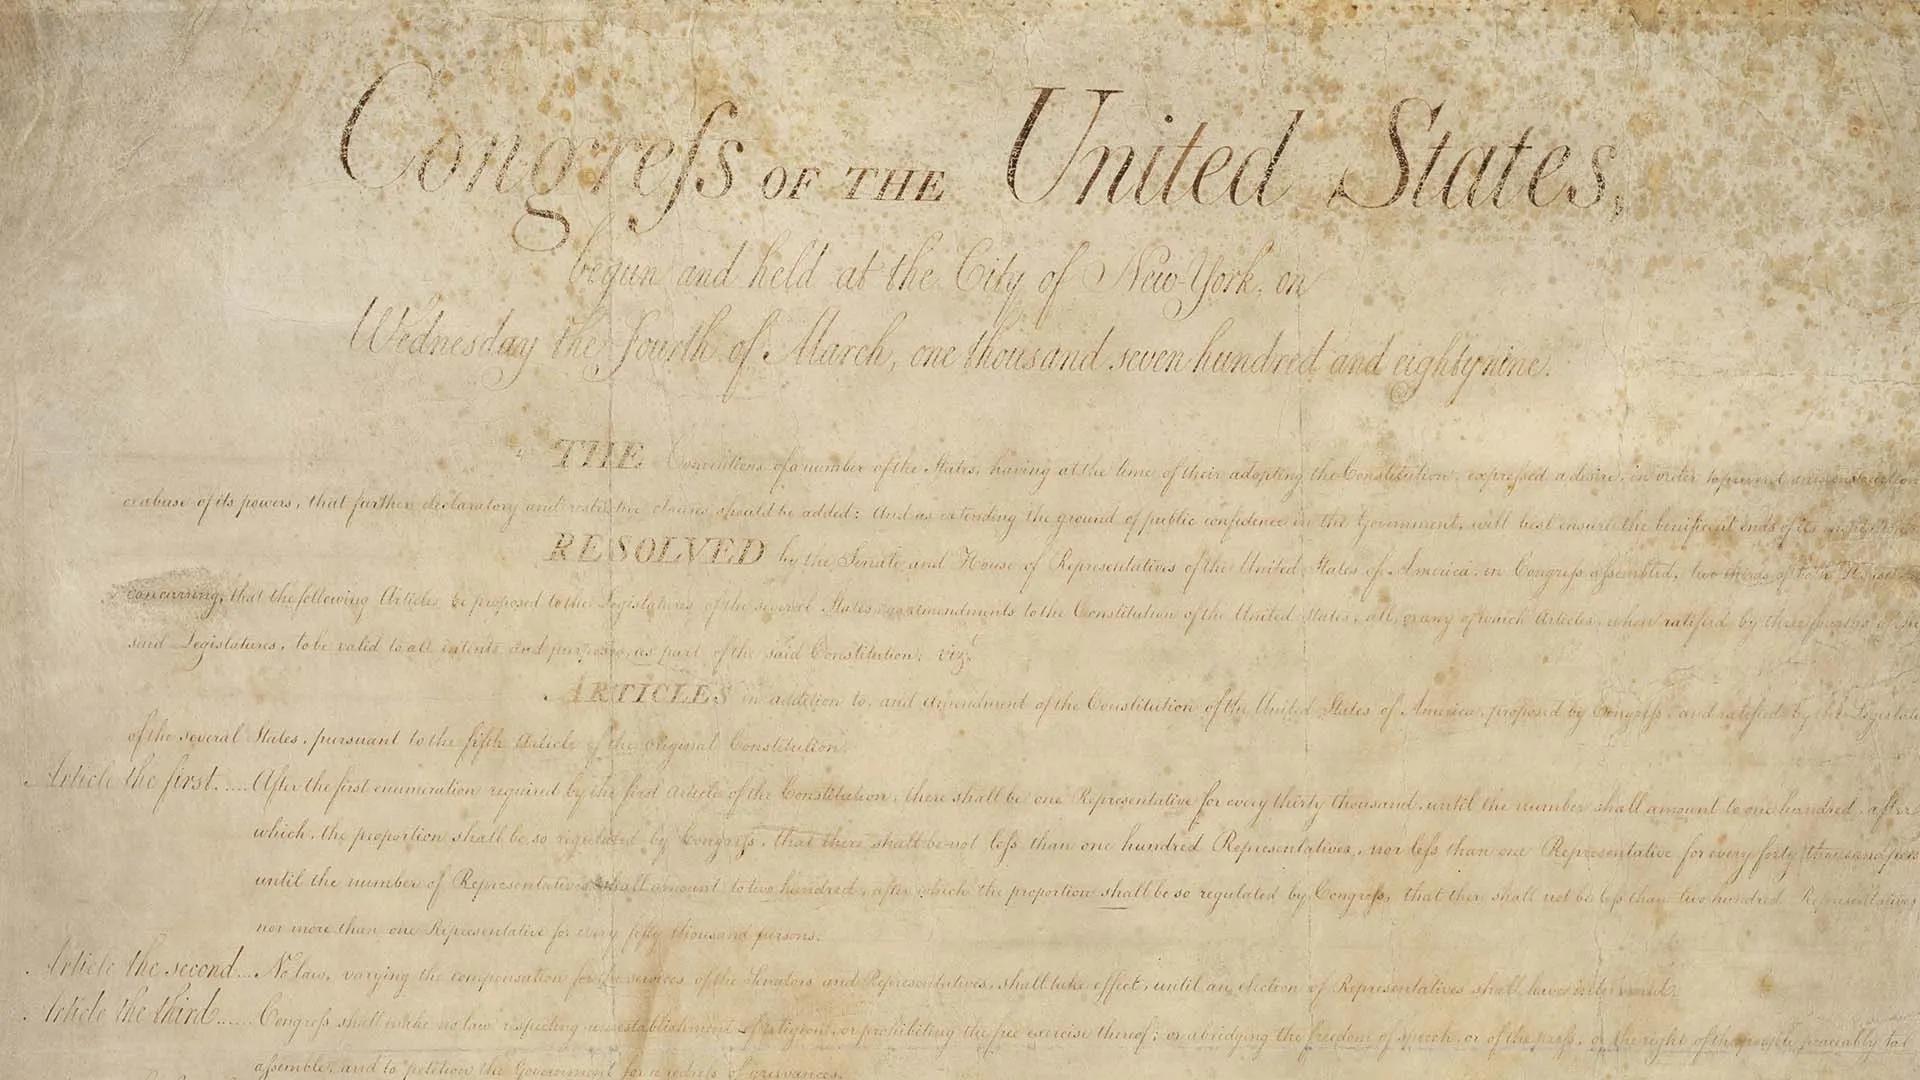 Historical parchment displaying the preamble and initial articles of the Bill of Rights, dated in New York, March 1789.